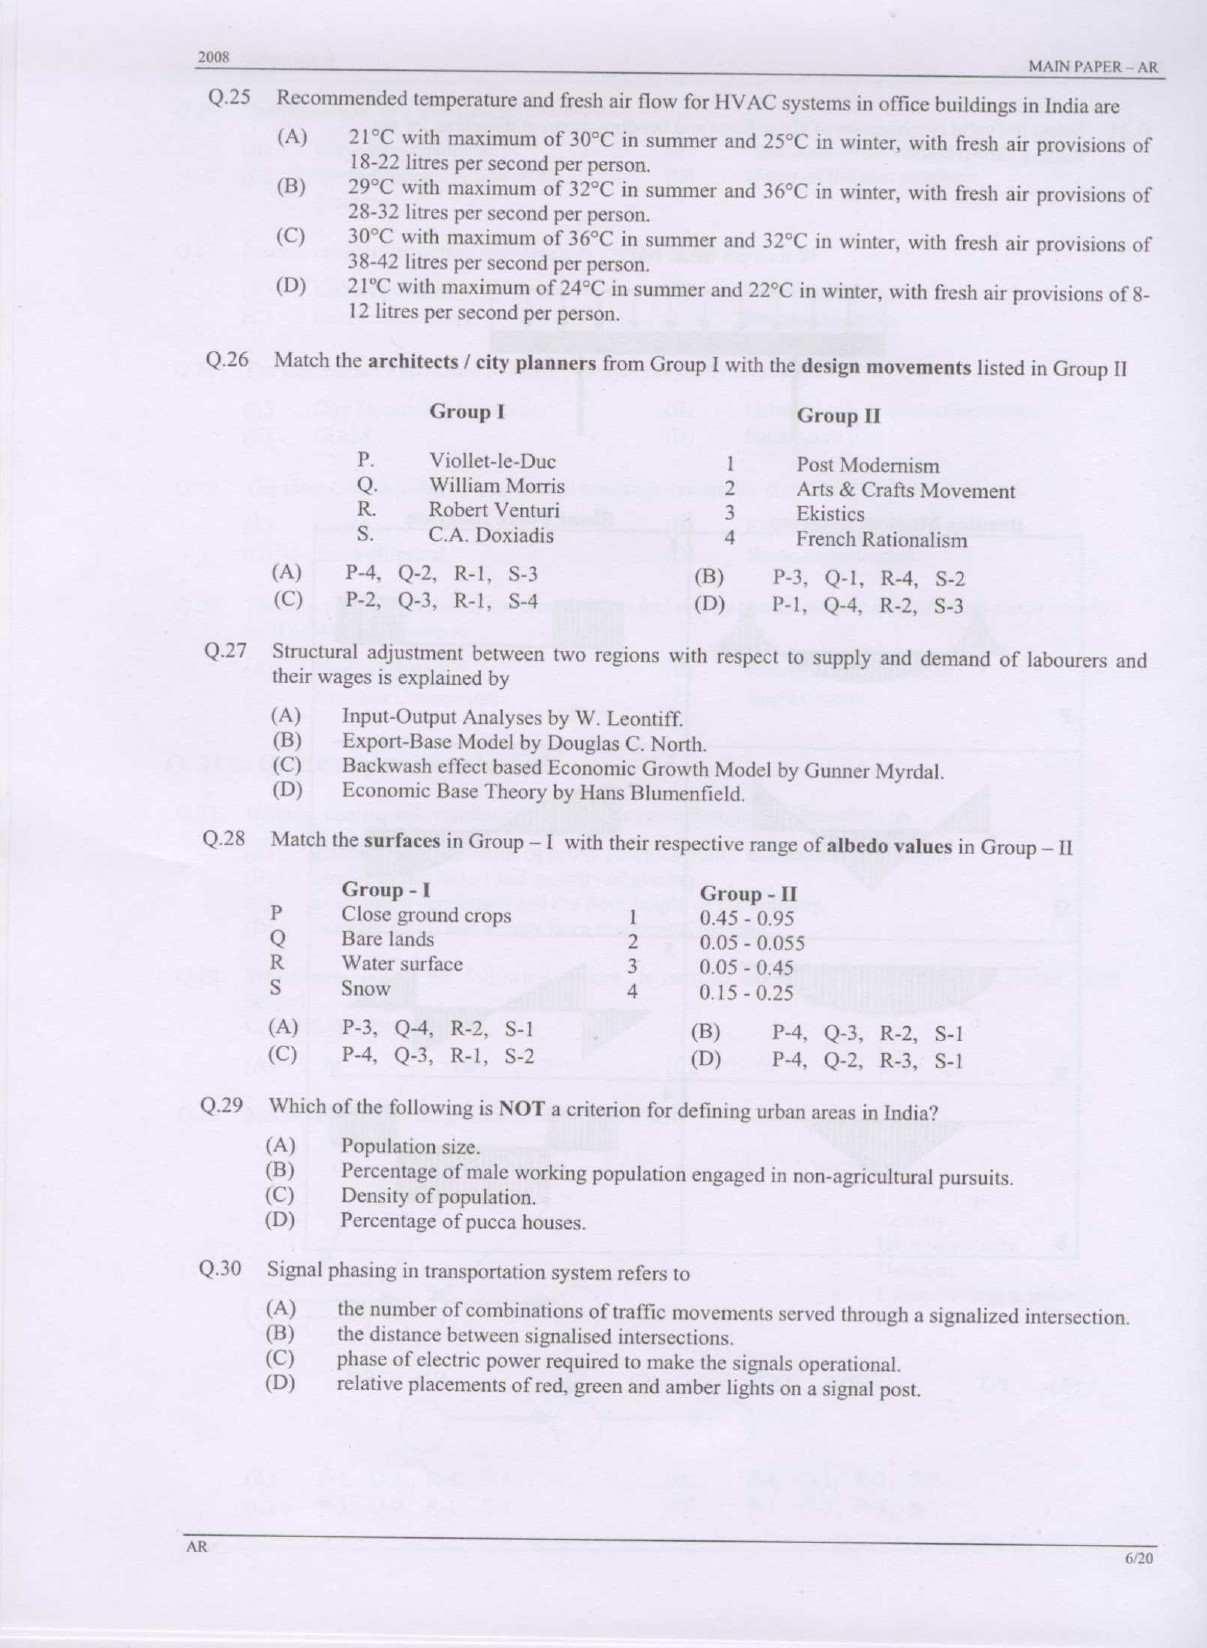 GATE Exam Question Paper 2008 Architecture and Planning 6